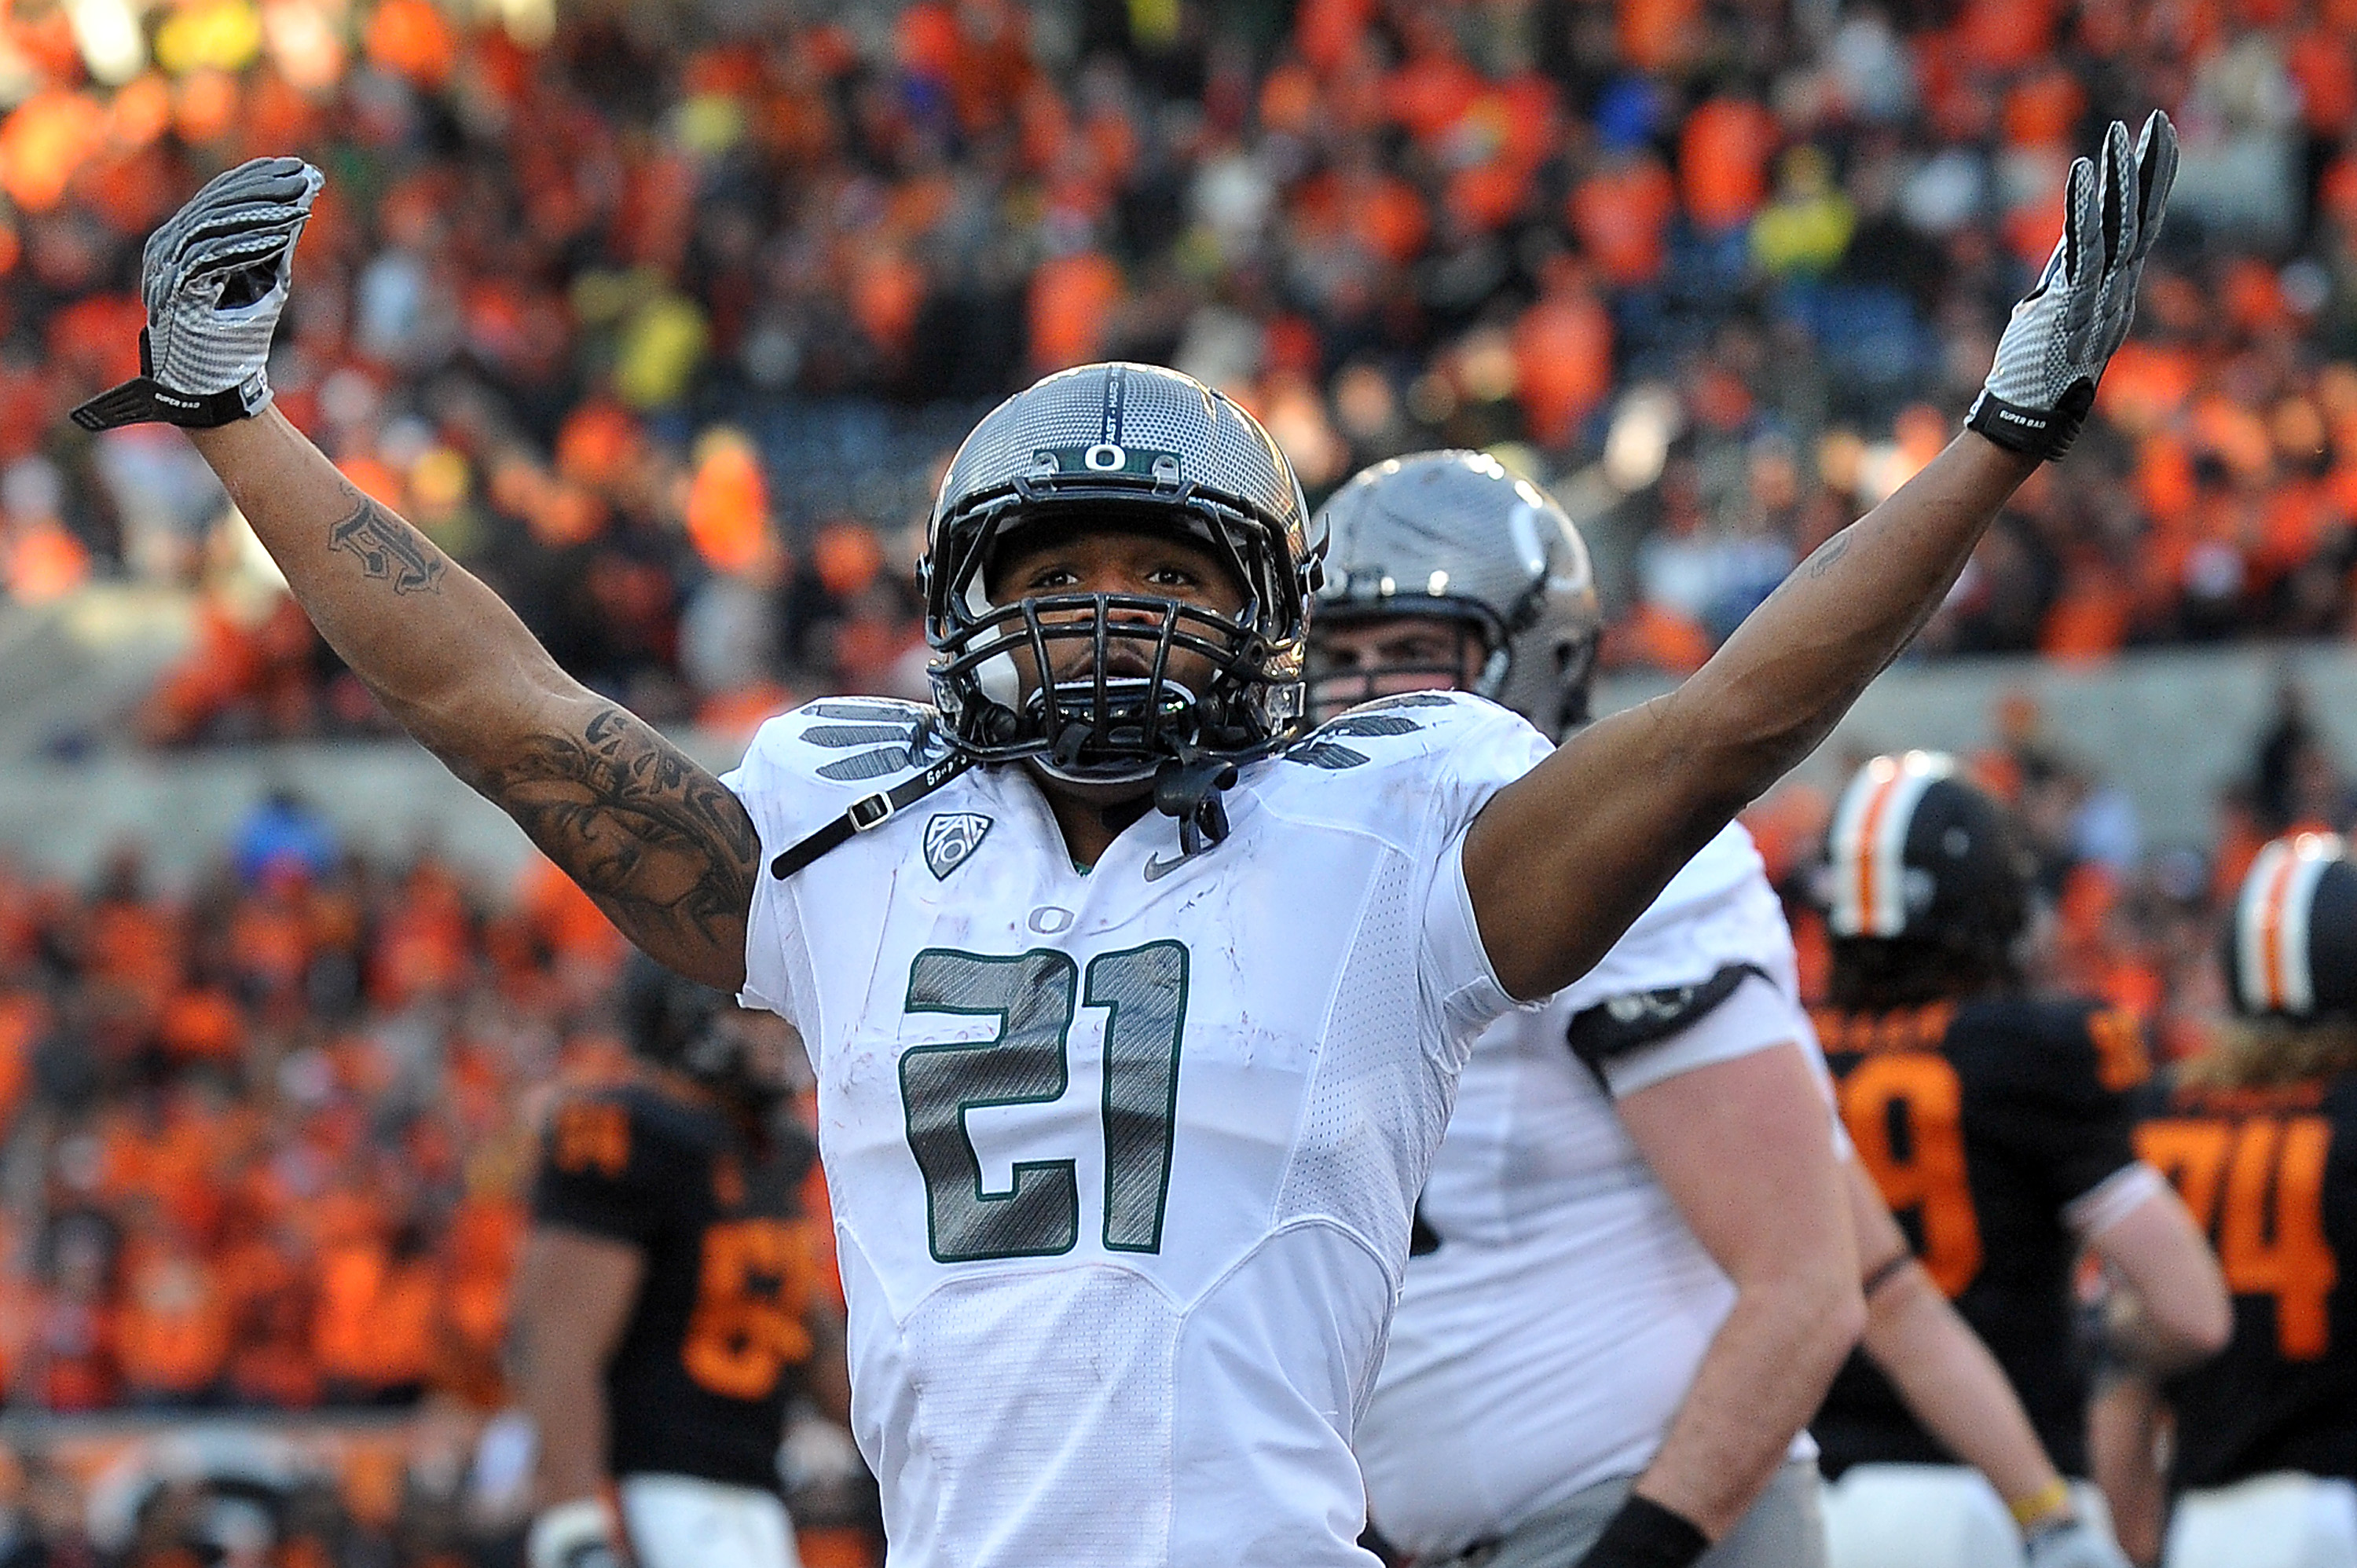 CORVALLIS, OR - DECEMBER 4: LaMichael James #21 of the Oregon Ducks celebrates a touchdown in the fourth quarter of the game at Reser Stadium on December 4, 2010 in Corvallis, Oregon. The Ducks beat the Beavers 37-20 to likely go on to the BCS Championshi